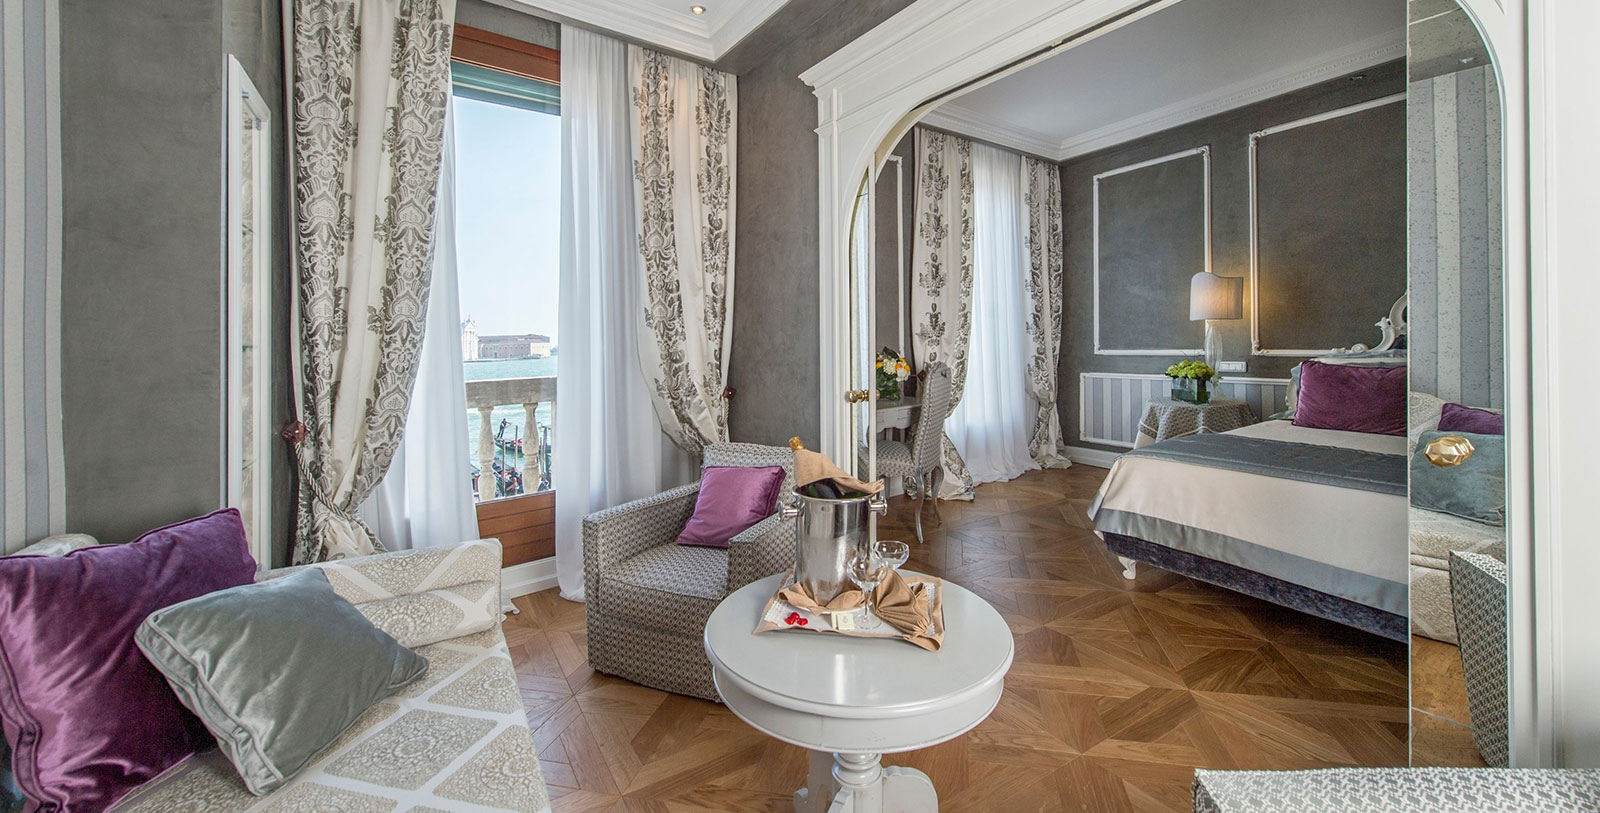 Image of Junior Suite at Hotel Savoia & Jolanda, 19th century, a member of Historic Hotels Worldwide in Venice, Italy